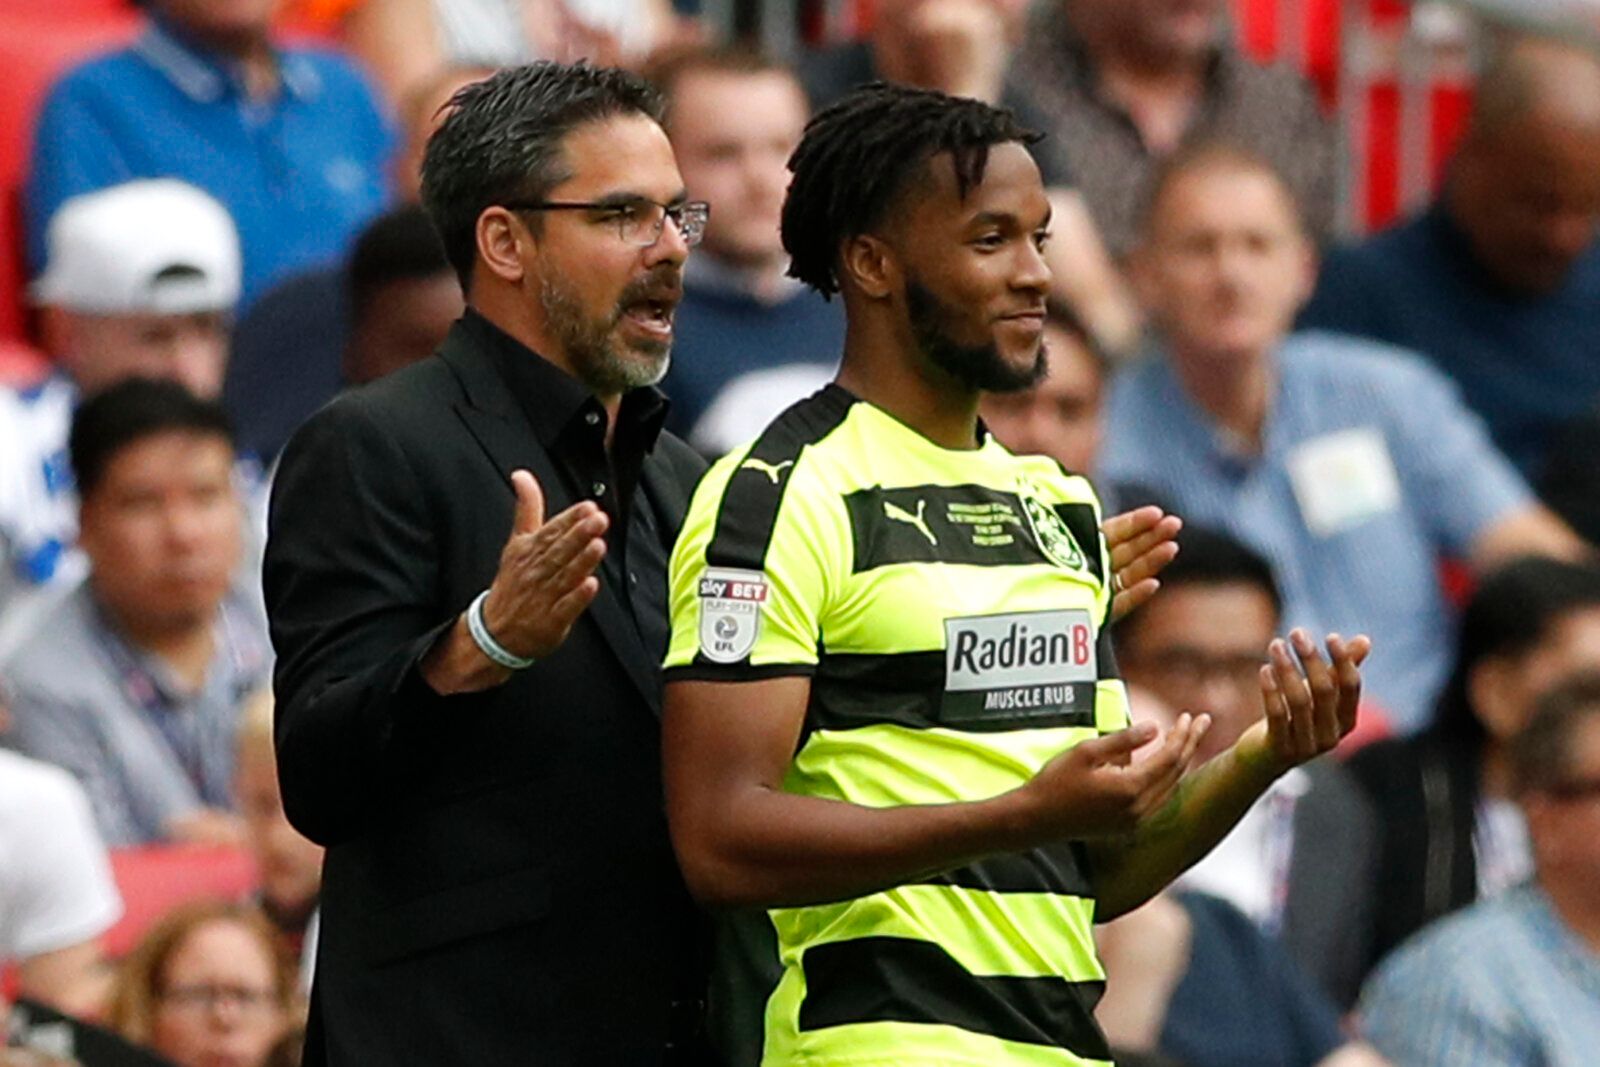 Britain Football Soccer - Reading v Huddersfield Town - Sky Bet Championship Play-Off Final - Wembley Stadium, London, England - 29/5/17 Huddersfield Town's Kasey Palmer with manager David Wagner before coming on as substitute Action Images via Reuters / John Sibley Livepic EDITORIAL USE ONLY. No use with unauthorized audio, video, data, fixture lists, club/league logos or 